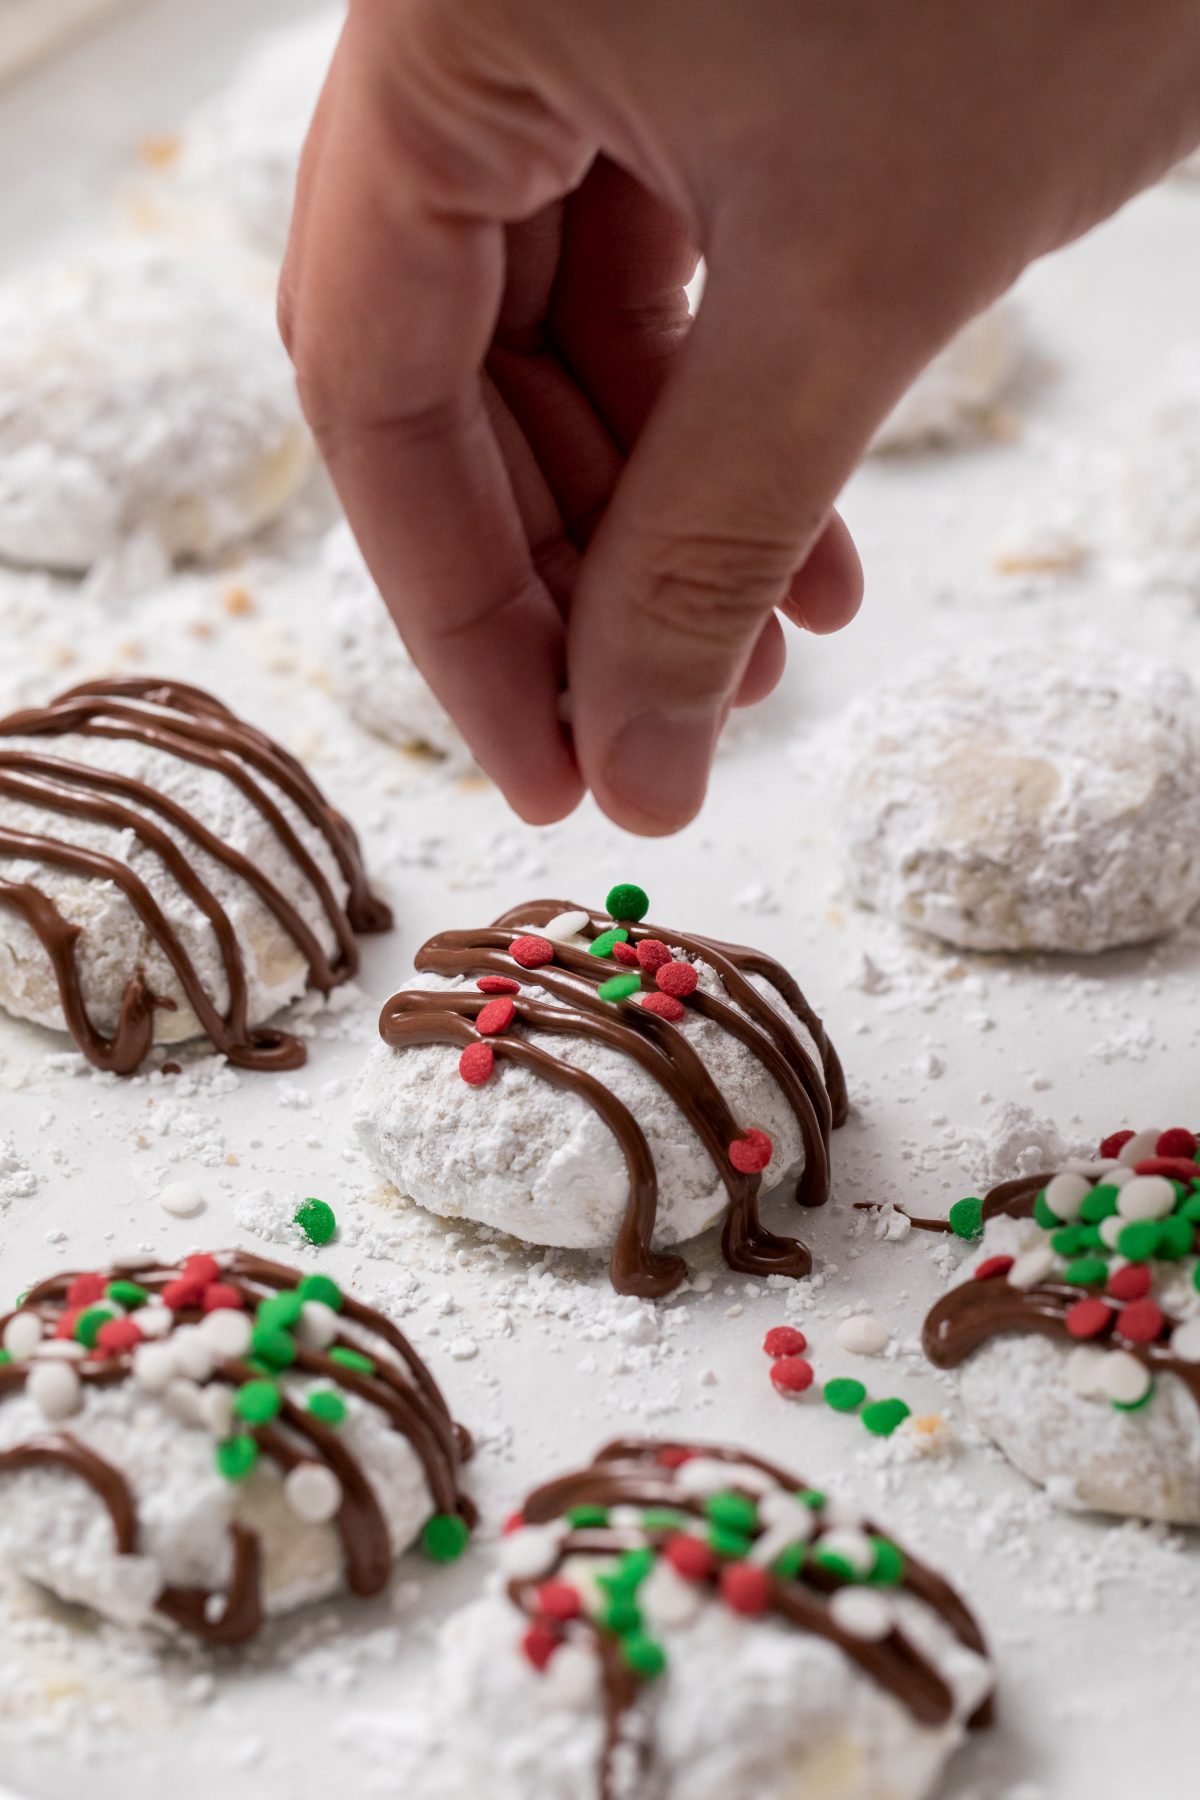 5D4B5480 - Chocolate Covered Snowball Peppermint Cookies - Decorate the snowballs